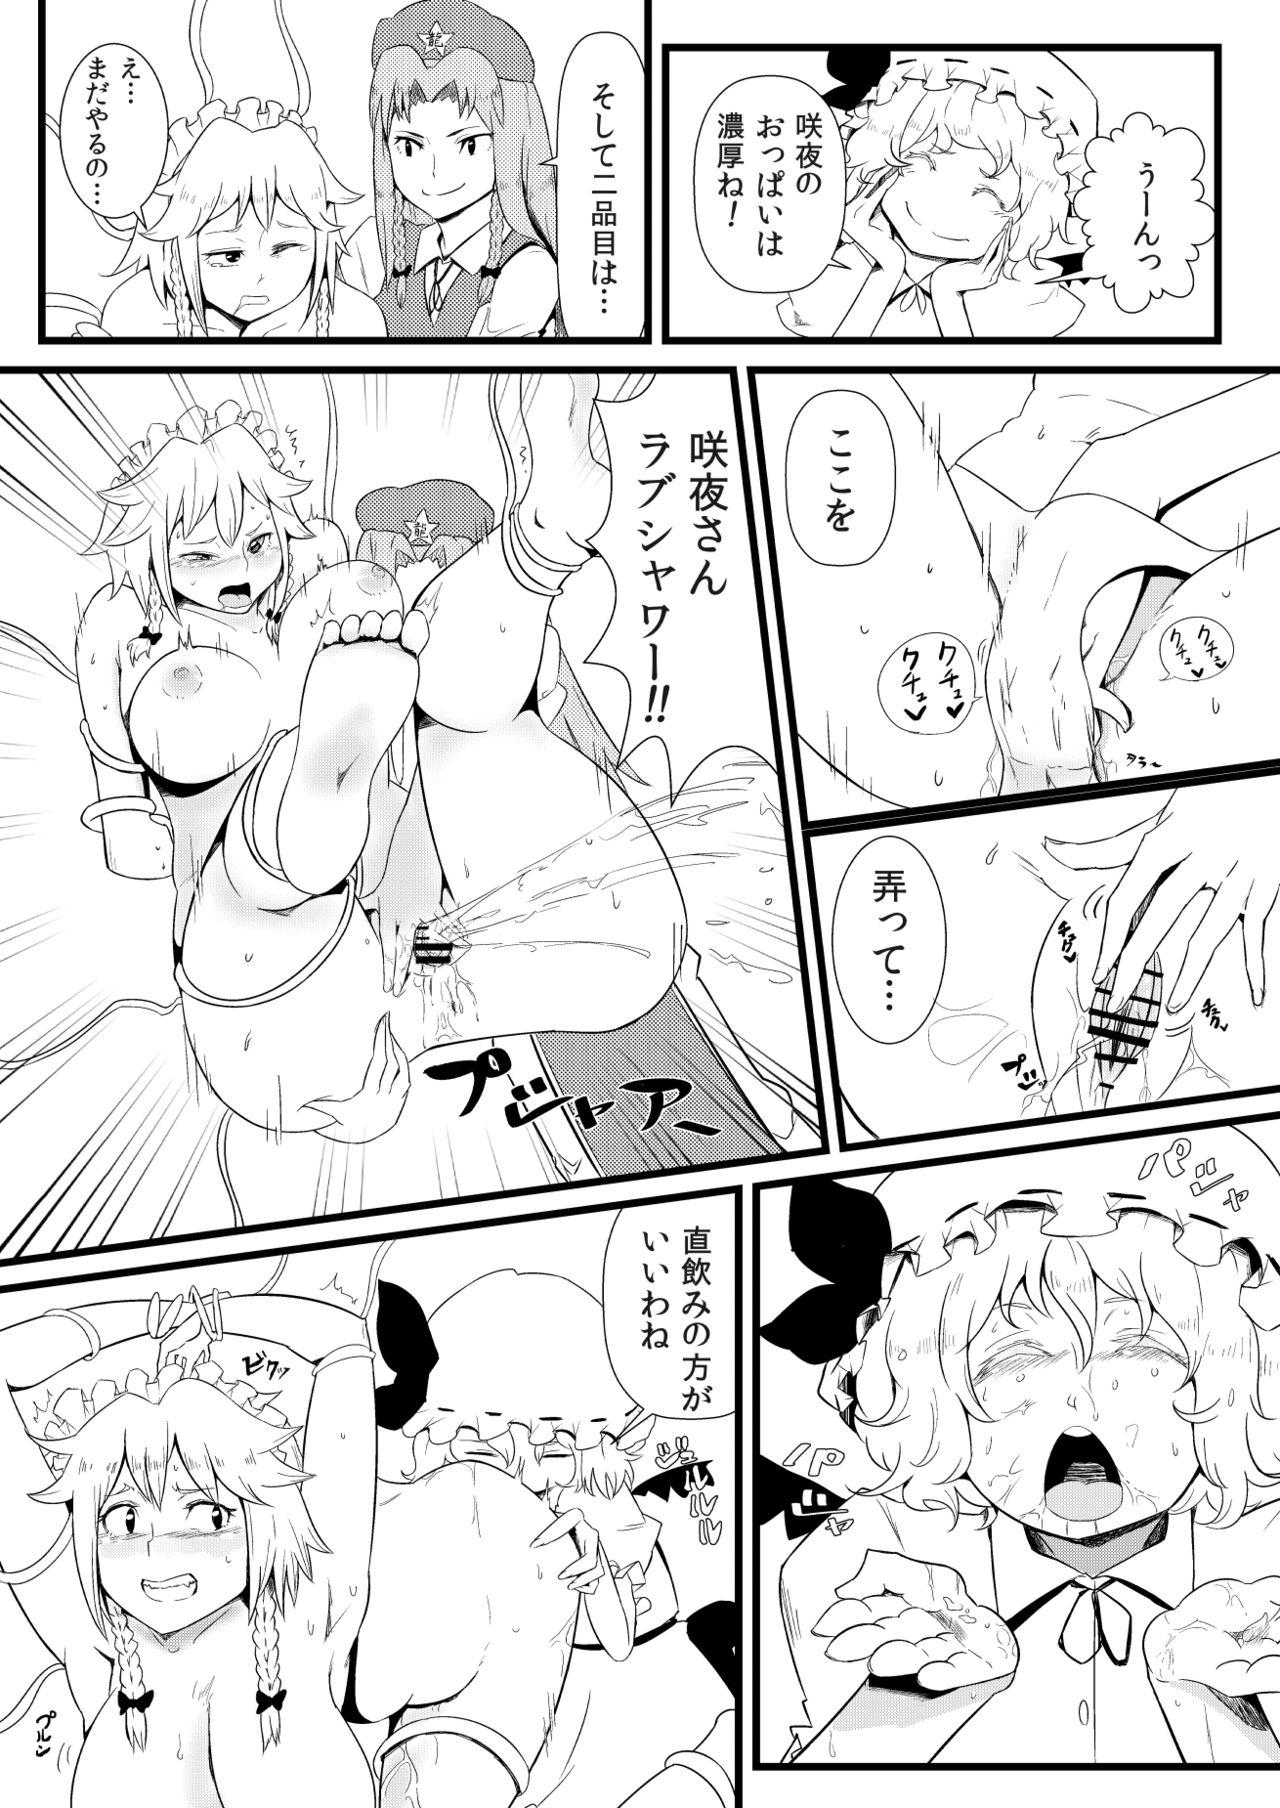 Realitykings 東方板としあき合同誌5 - Touhou project Gang Bang - Page 7